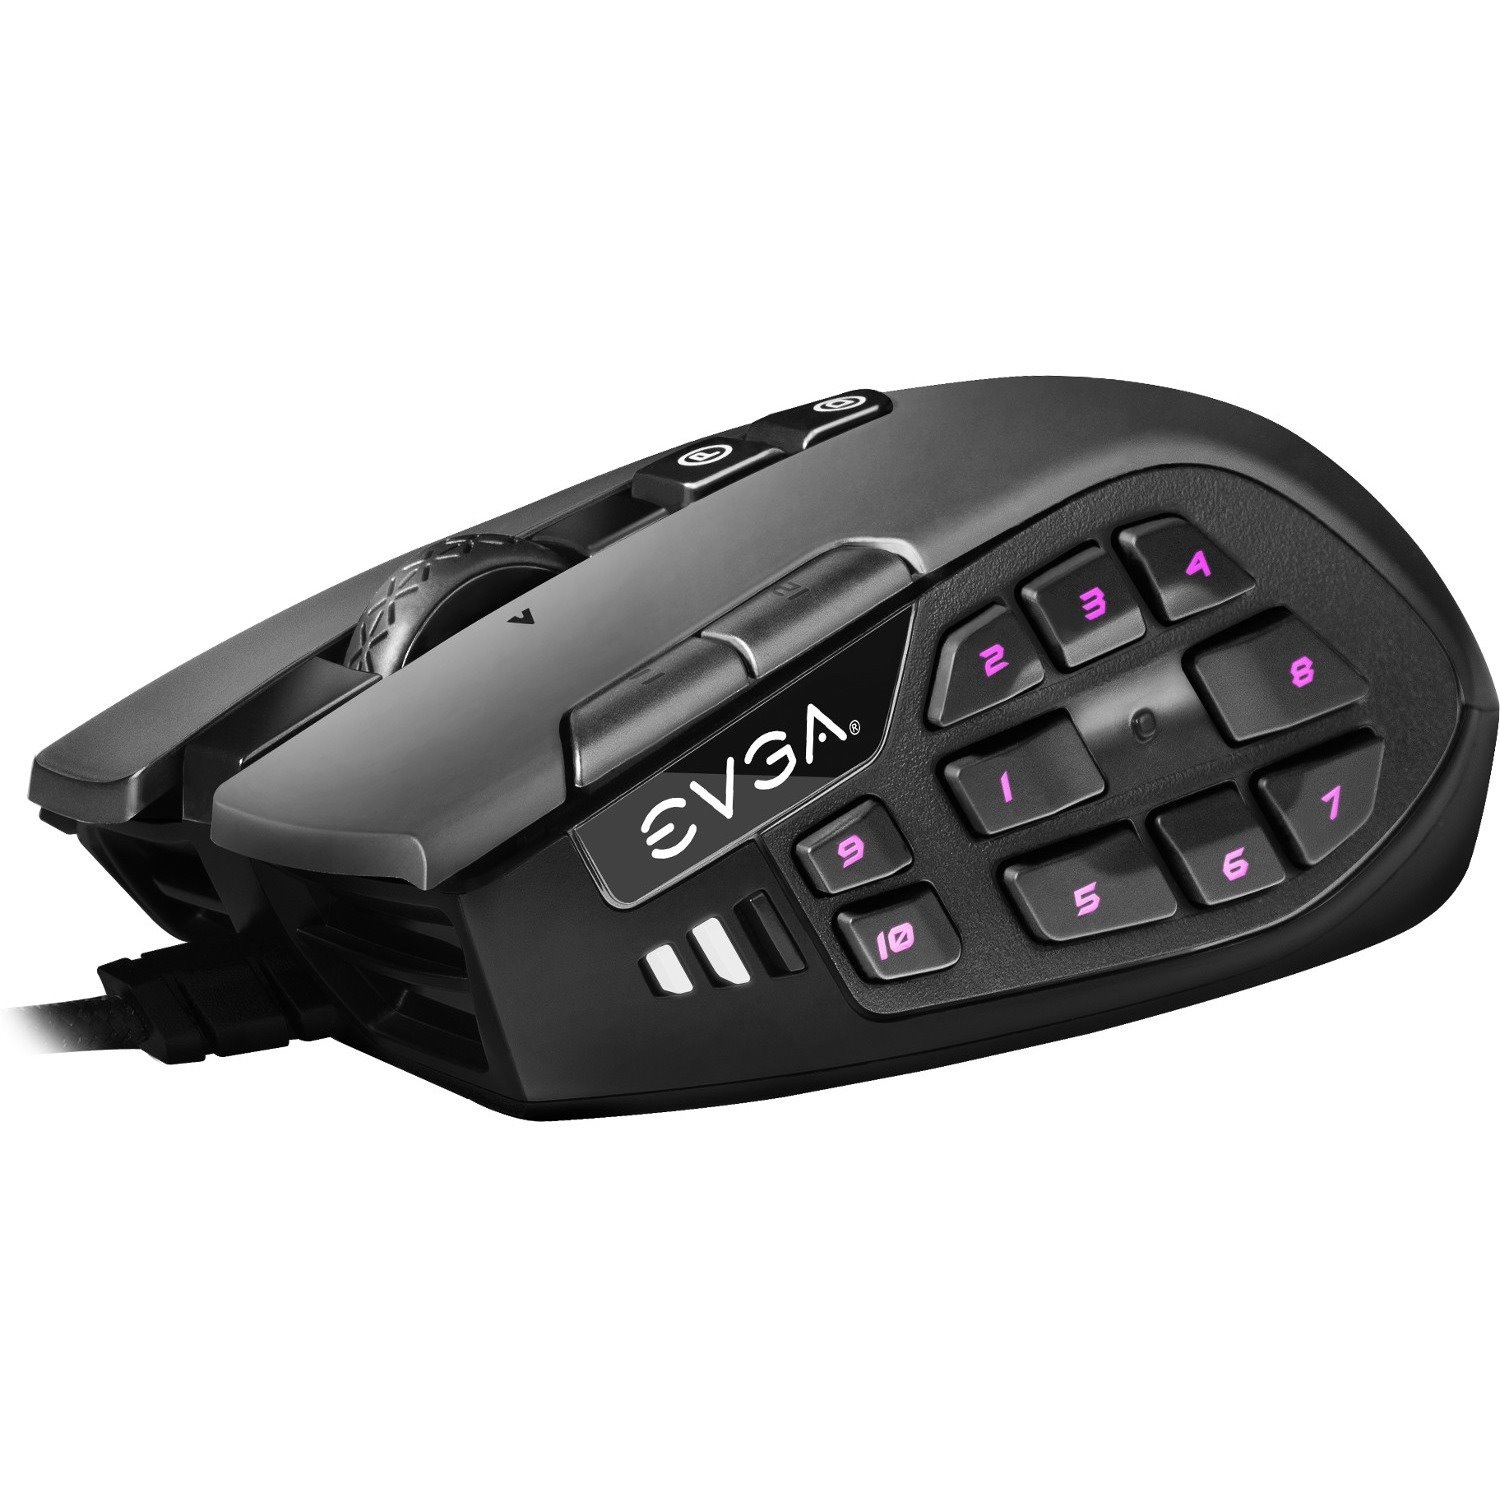 EVGA X15 Gaming Mouse - USB 2.0 Type A - Optical - 20 Button(s) - Black